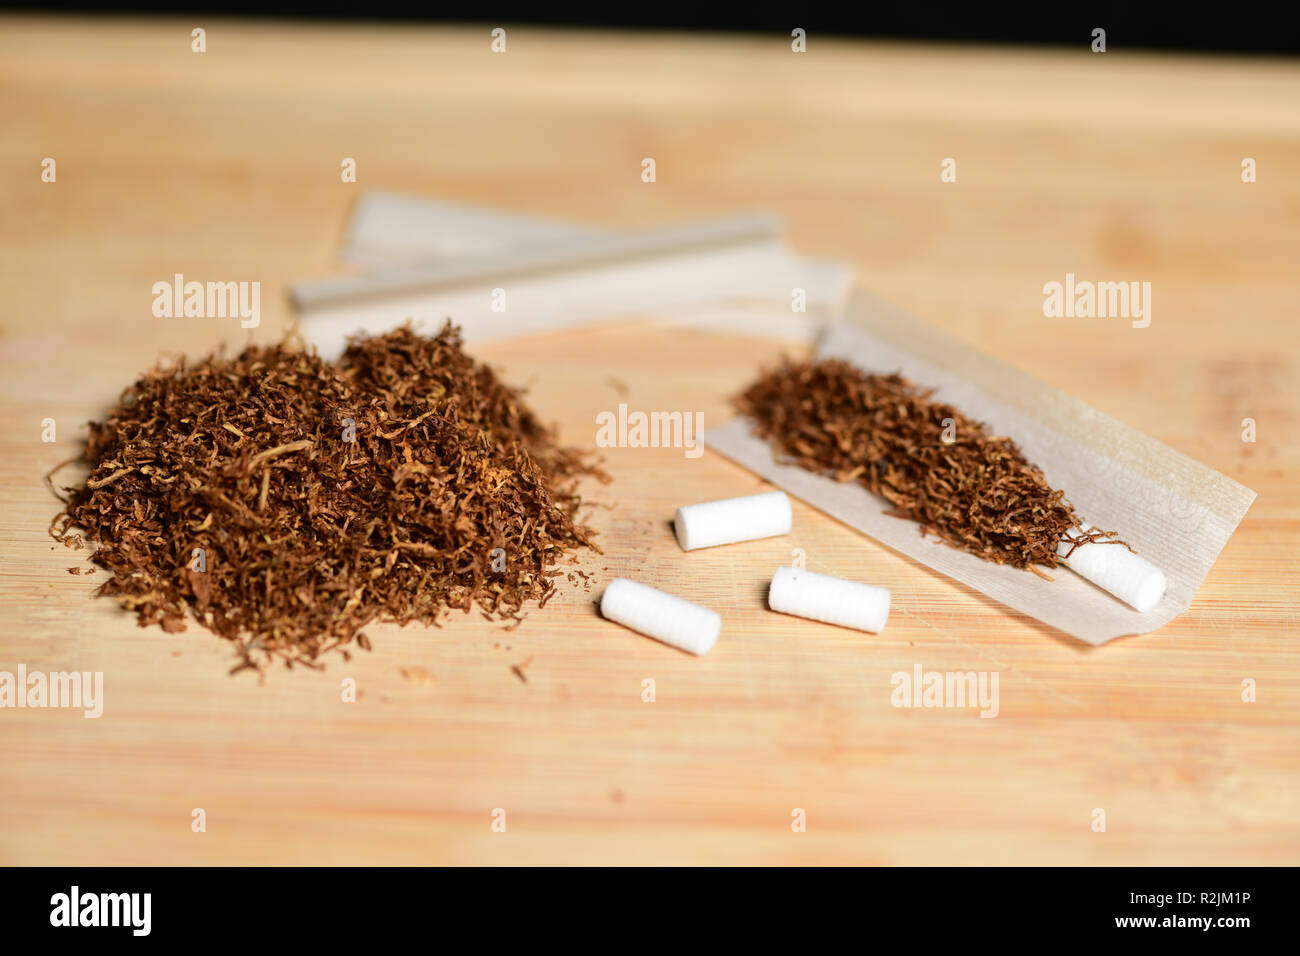 Hand rolling tobacco, paper and filters to make cigarettes on rustic wood  Stock Photo - Alamy